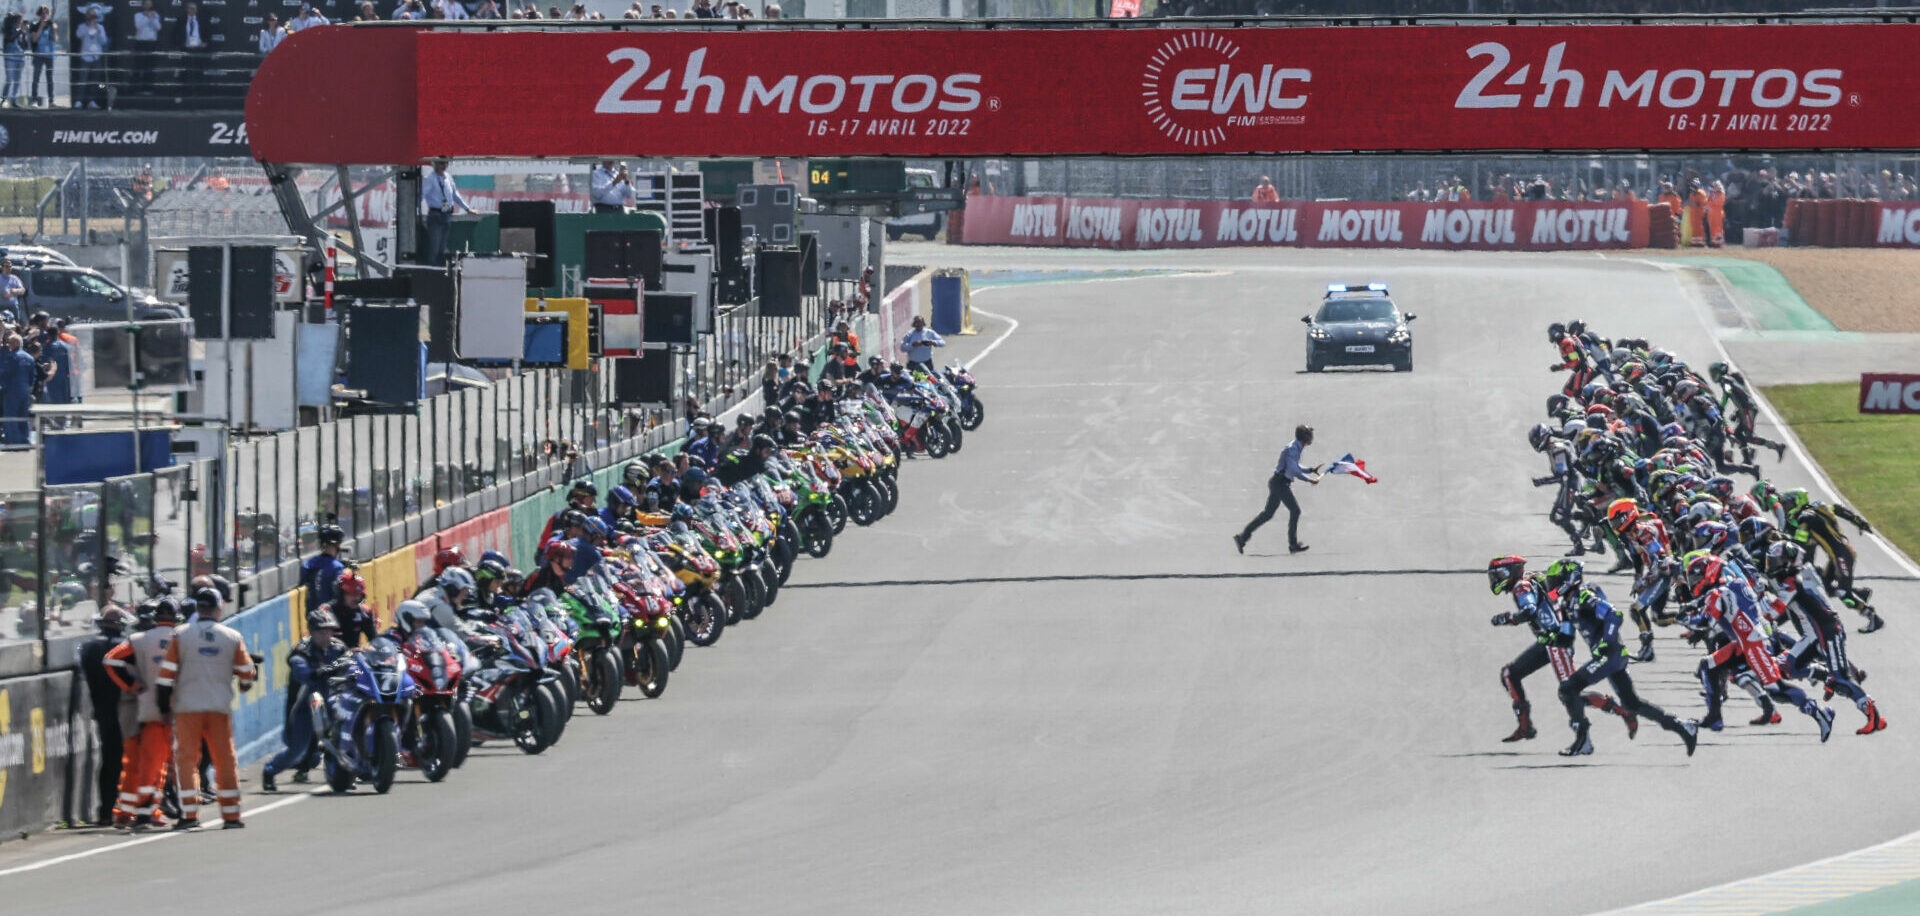 World Endurance: Four-Round Schedule Again In 2023 - Roadracing World Magazine | Motorcycle